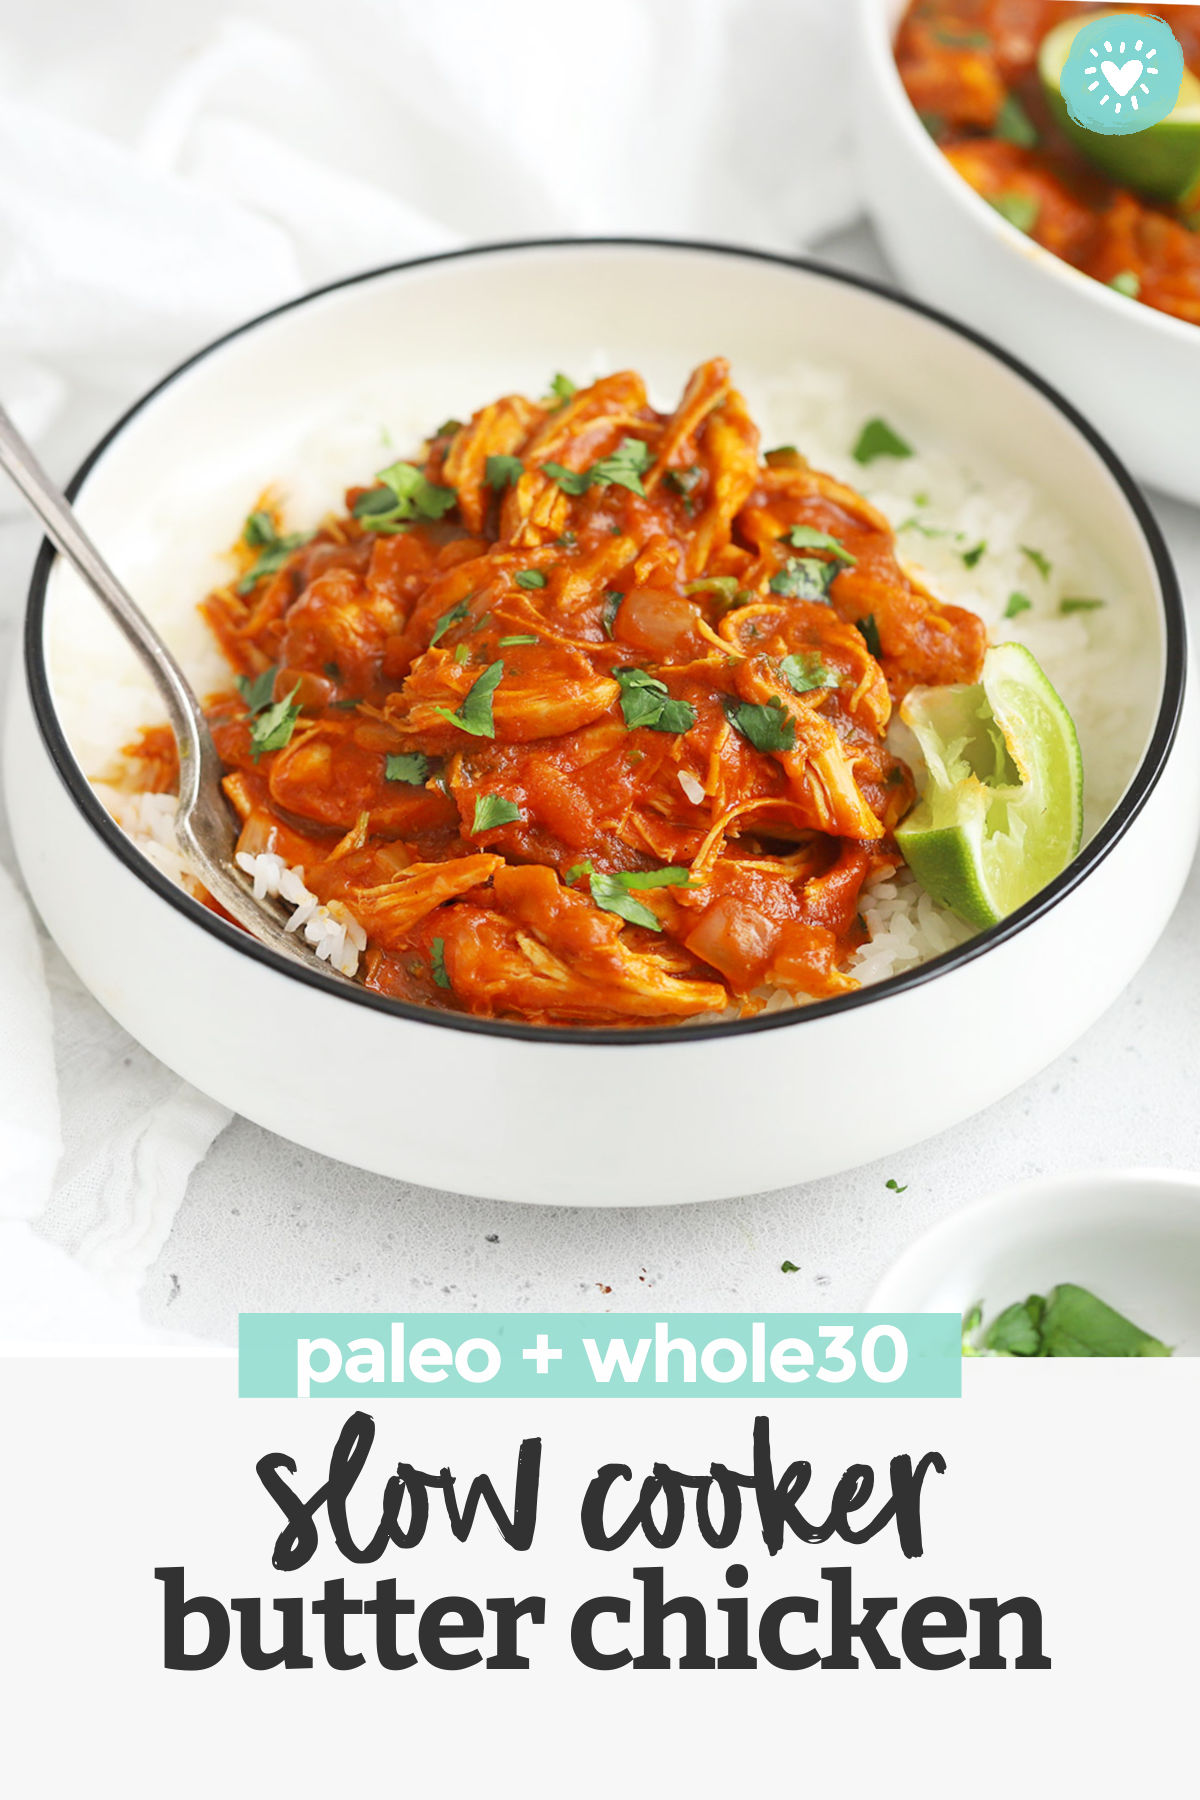 Slow Cooker Butter Chicken - This paleo butter chicken recipe is a perfect HEALTHY slow cooker dinner! It's so easy and delicious, you'll want to slurp the sauce with a spoon! (Gluten-Free, Dairy-Free, Paleo, Whole30) // Whole30 butter chicken // crock pot butter chicken // dairy free butter chicken // Paleo Slow Cooker Recipe #slowcooker #crockpot #butterchicken #chicken